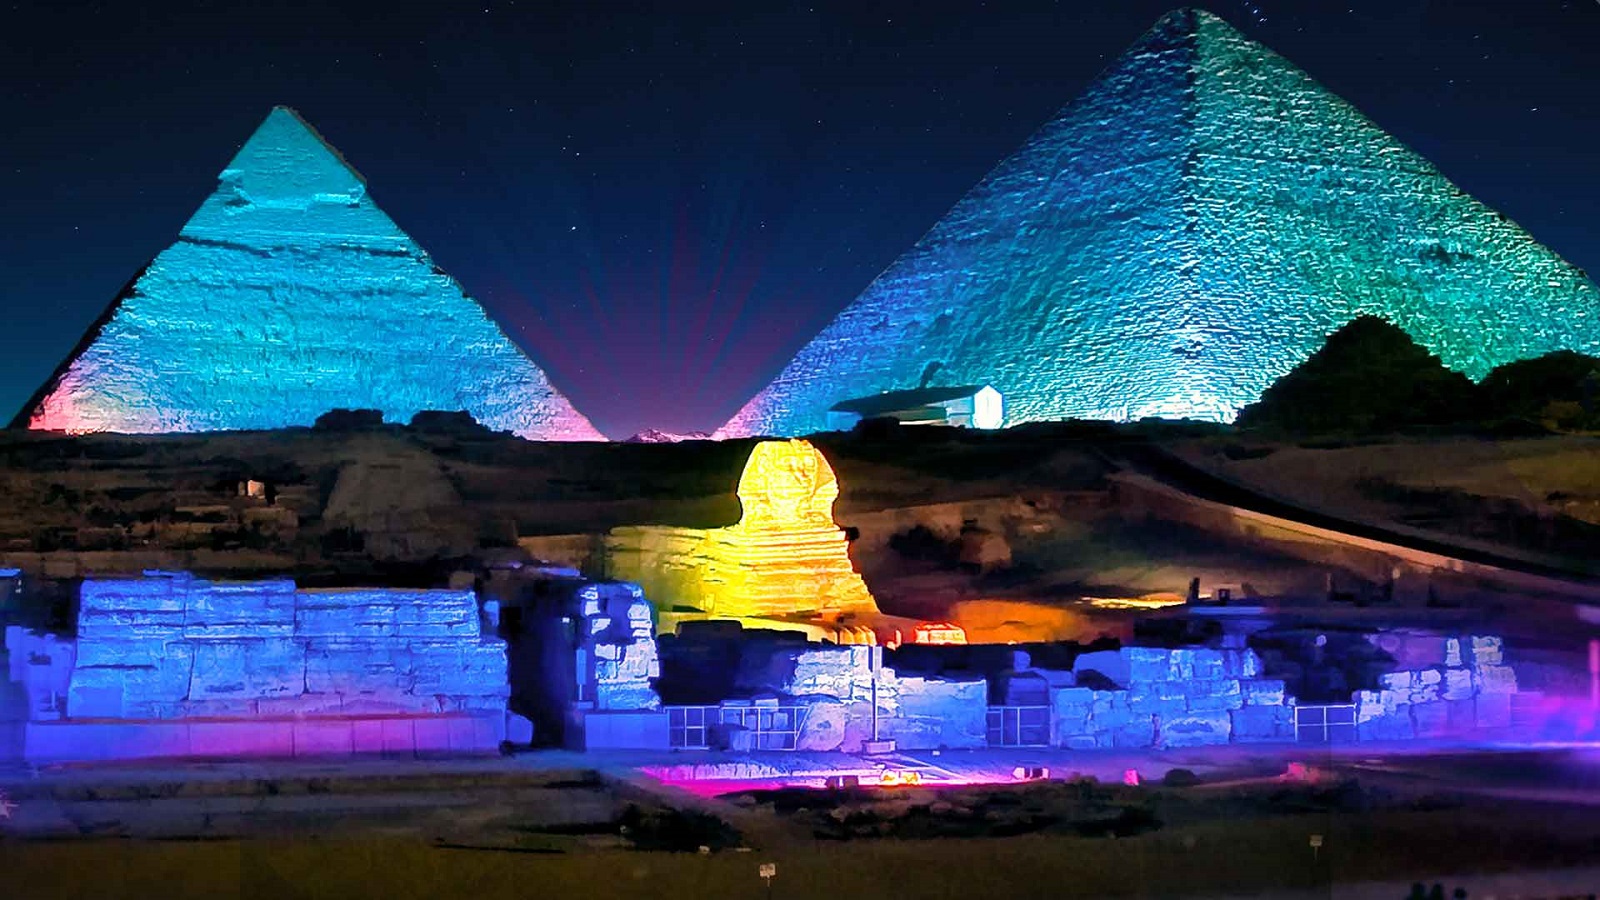 SOUND AND LIGHT SHOW AT THE PYRAMIDS OF GIZA